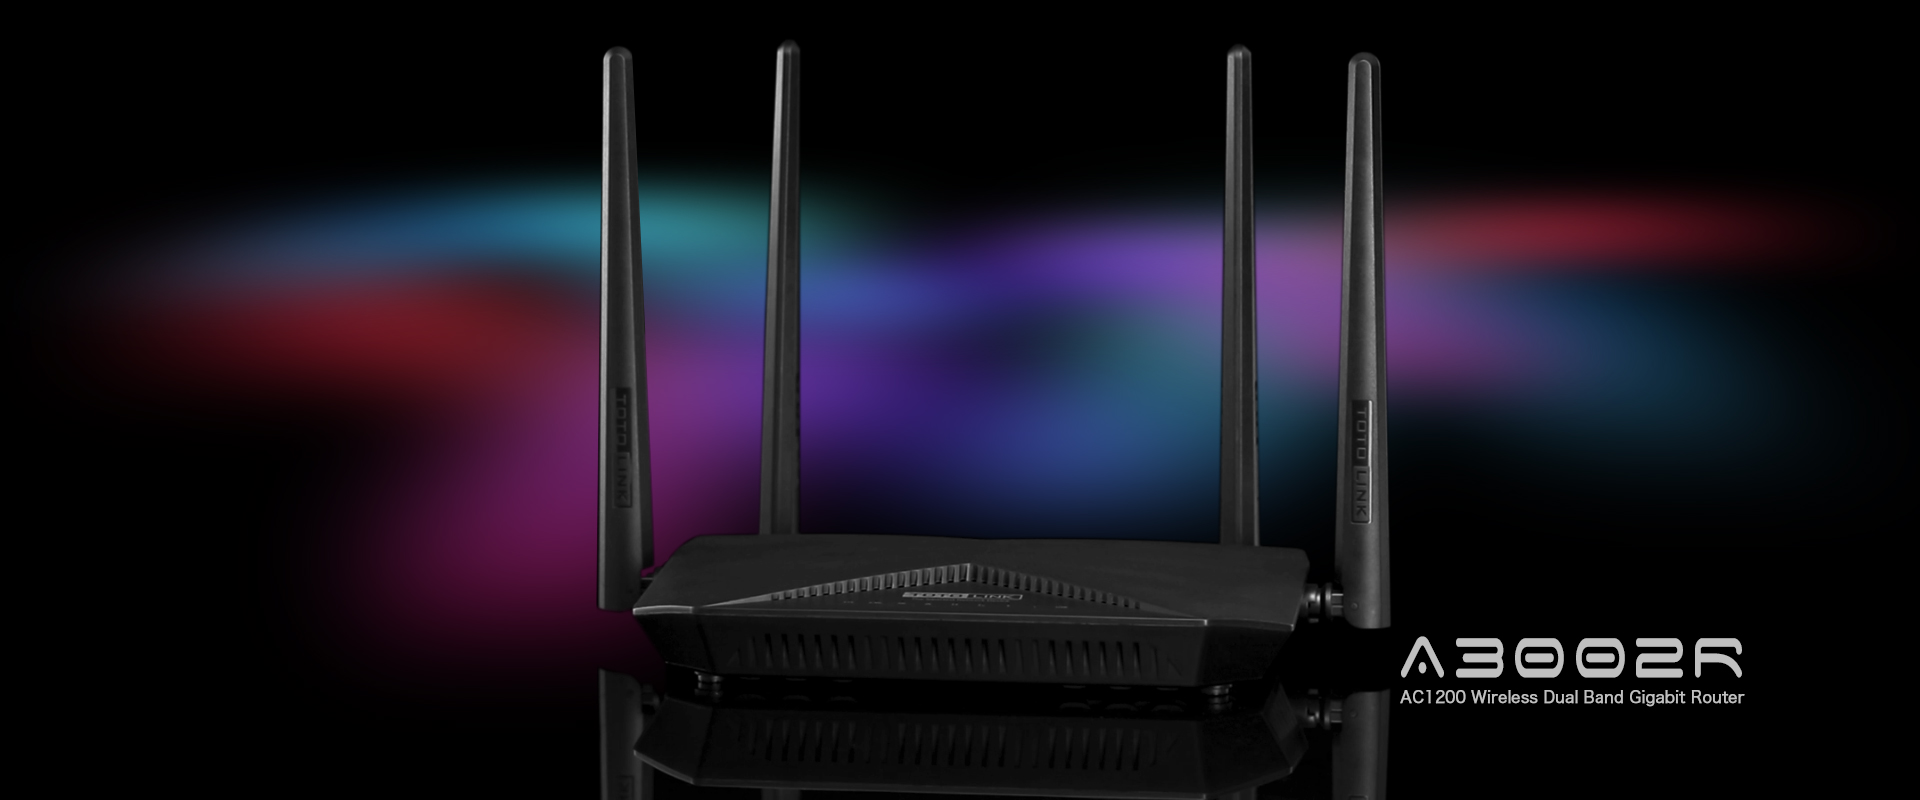 A3002R AC1200 Wireless Dual Band Router